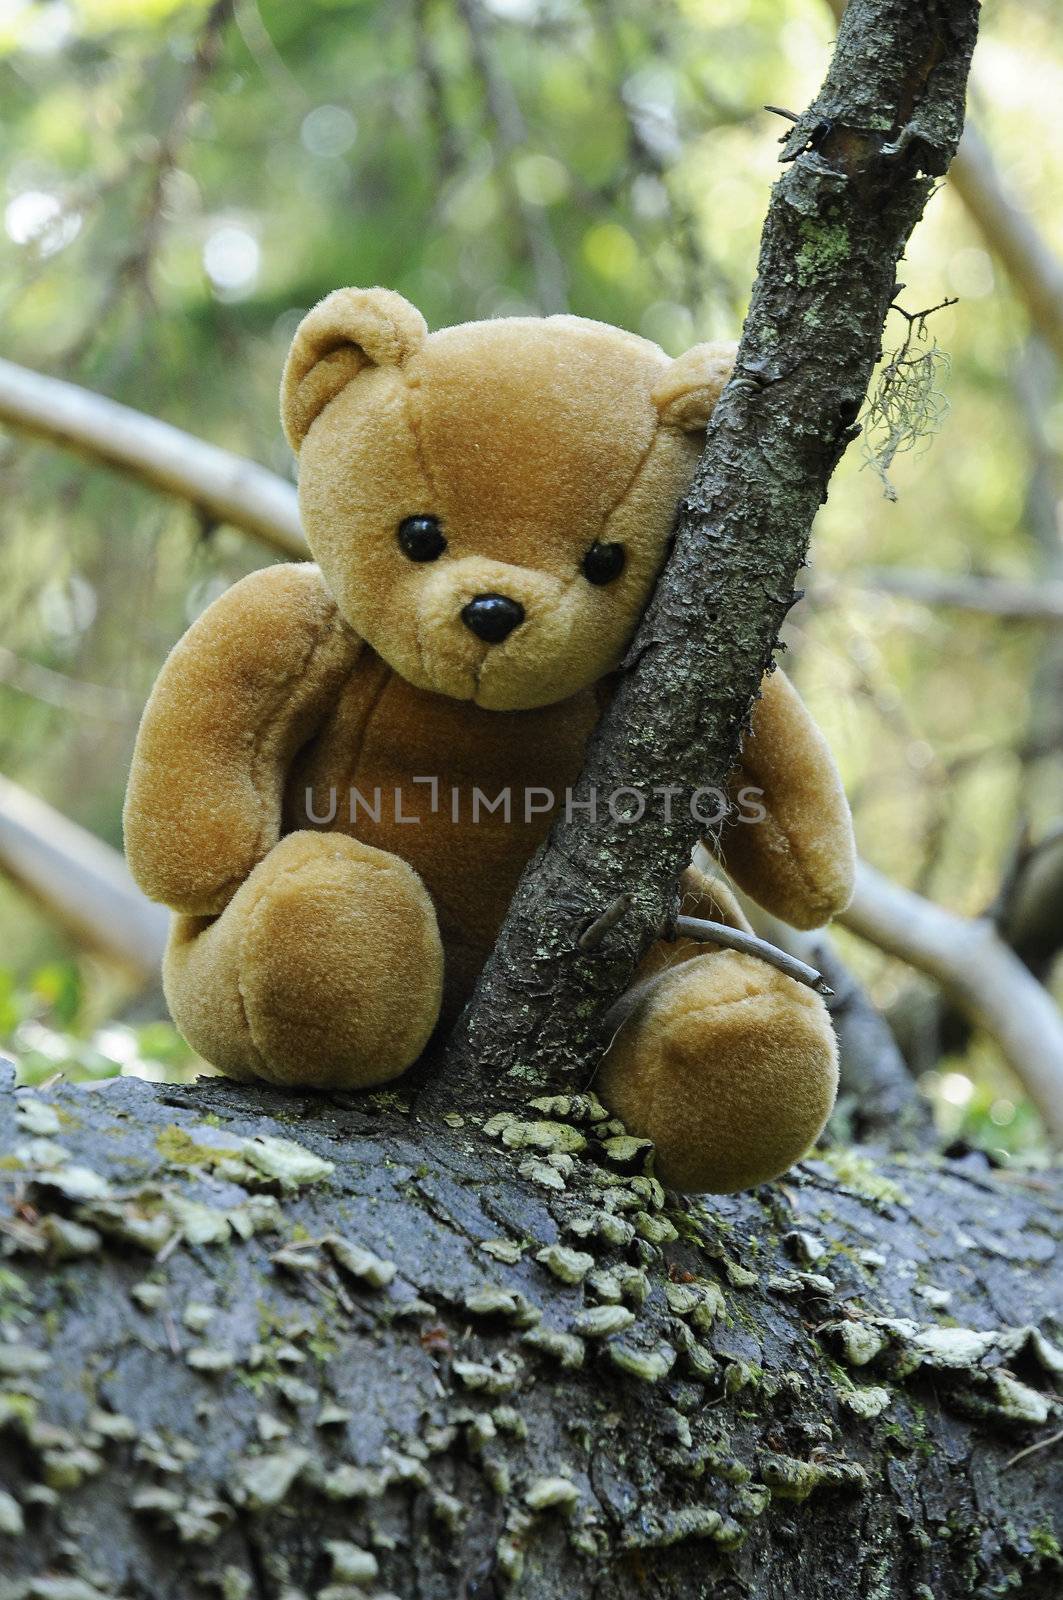 A lone Teddy bear sitting on a stem out there in the forest